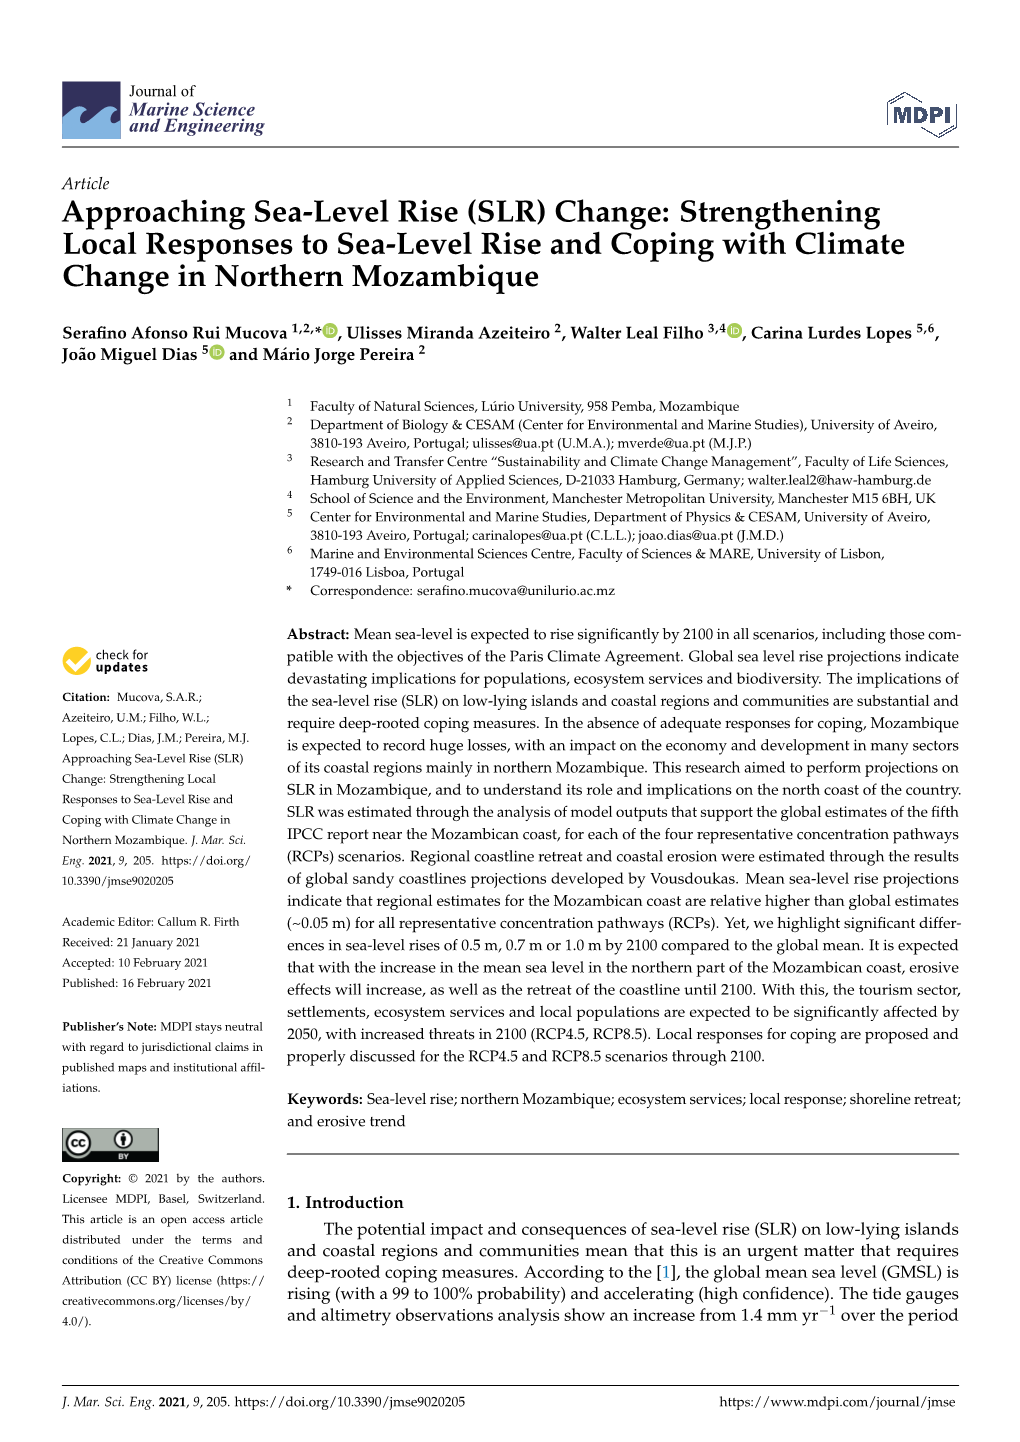 Approaching Sea-Level Rise (SLR) Change: Strengthening Local Responses to Sea-Level Rise and Coping with Climate Change in Northern Mozambique